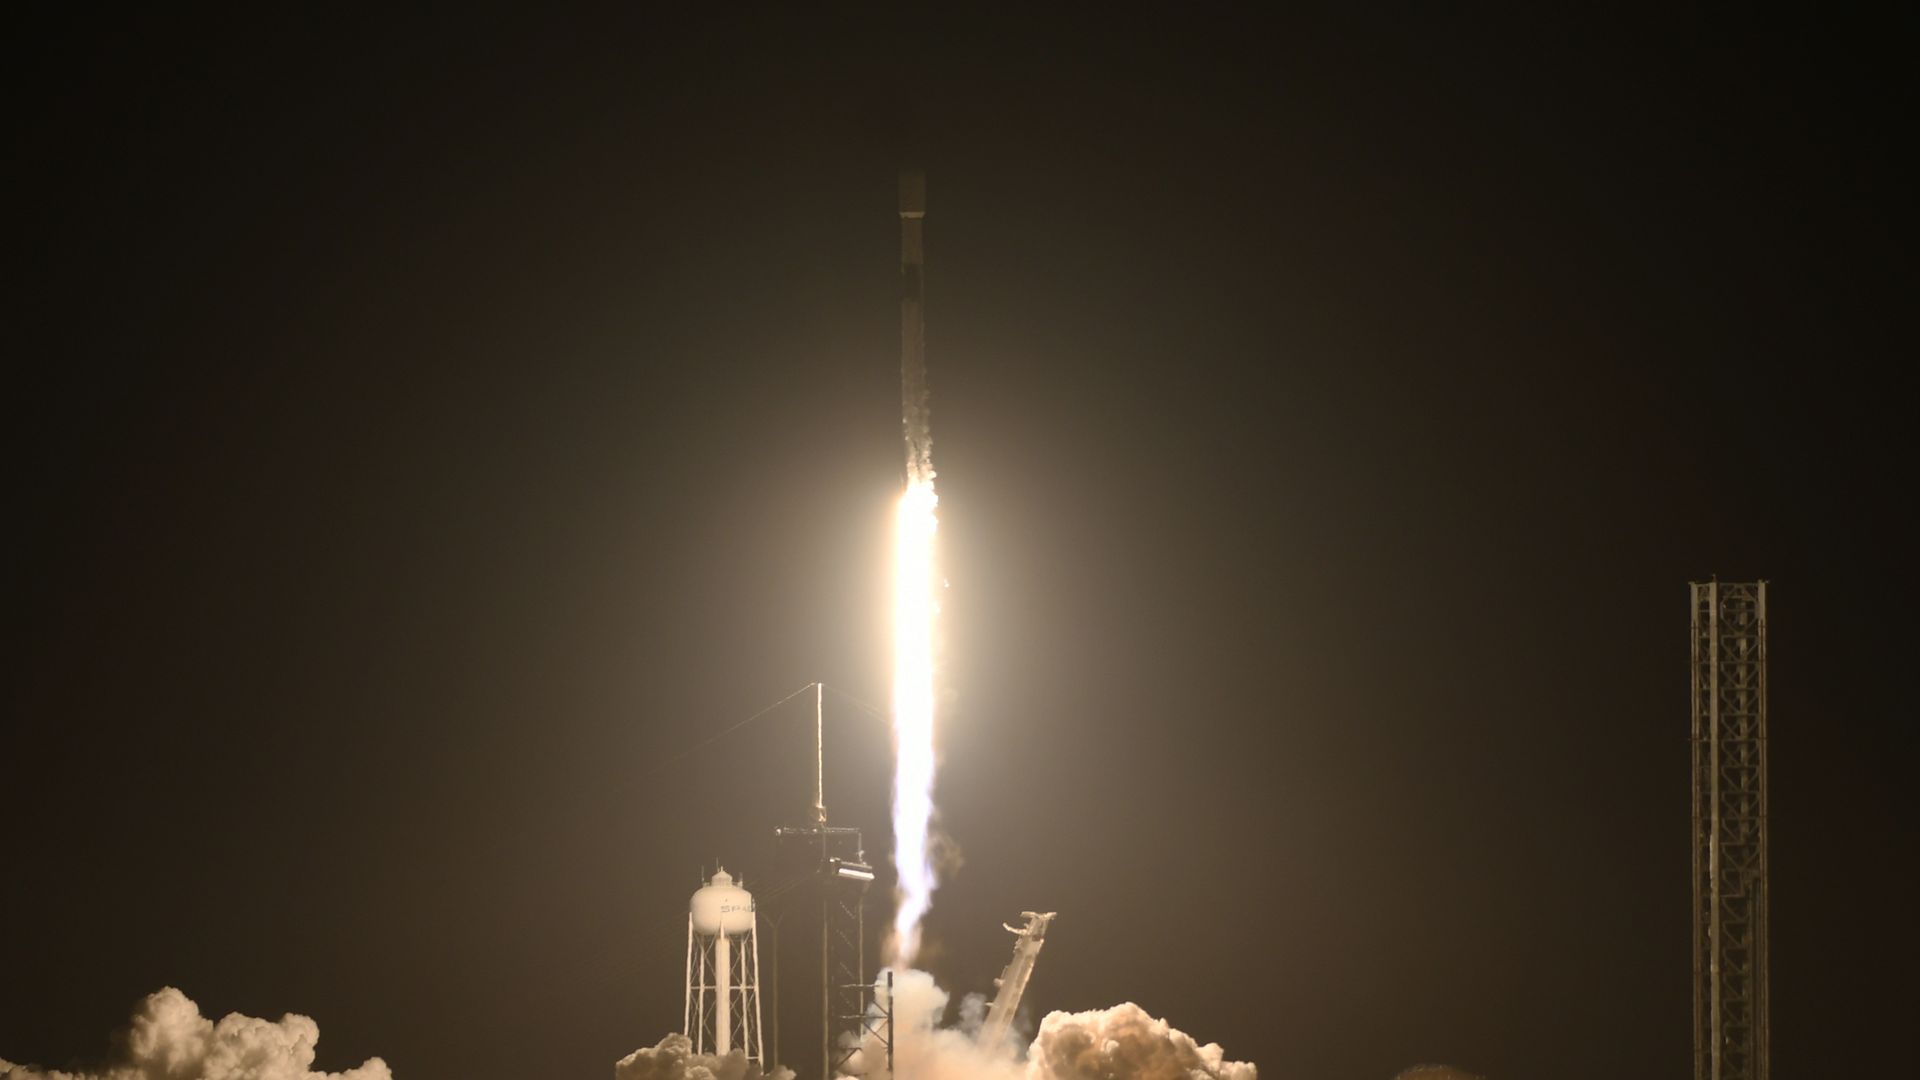 a SpaceX Falcon 9 rocket carrying the Nova-C lander for the IM-1 mission launches from pad 39A at the Kennedy Space Center 